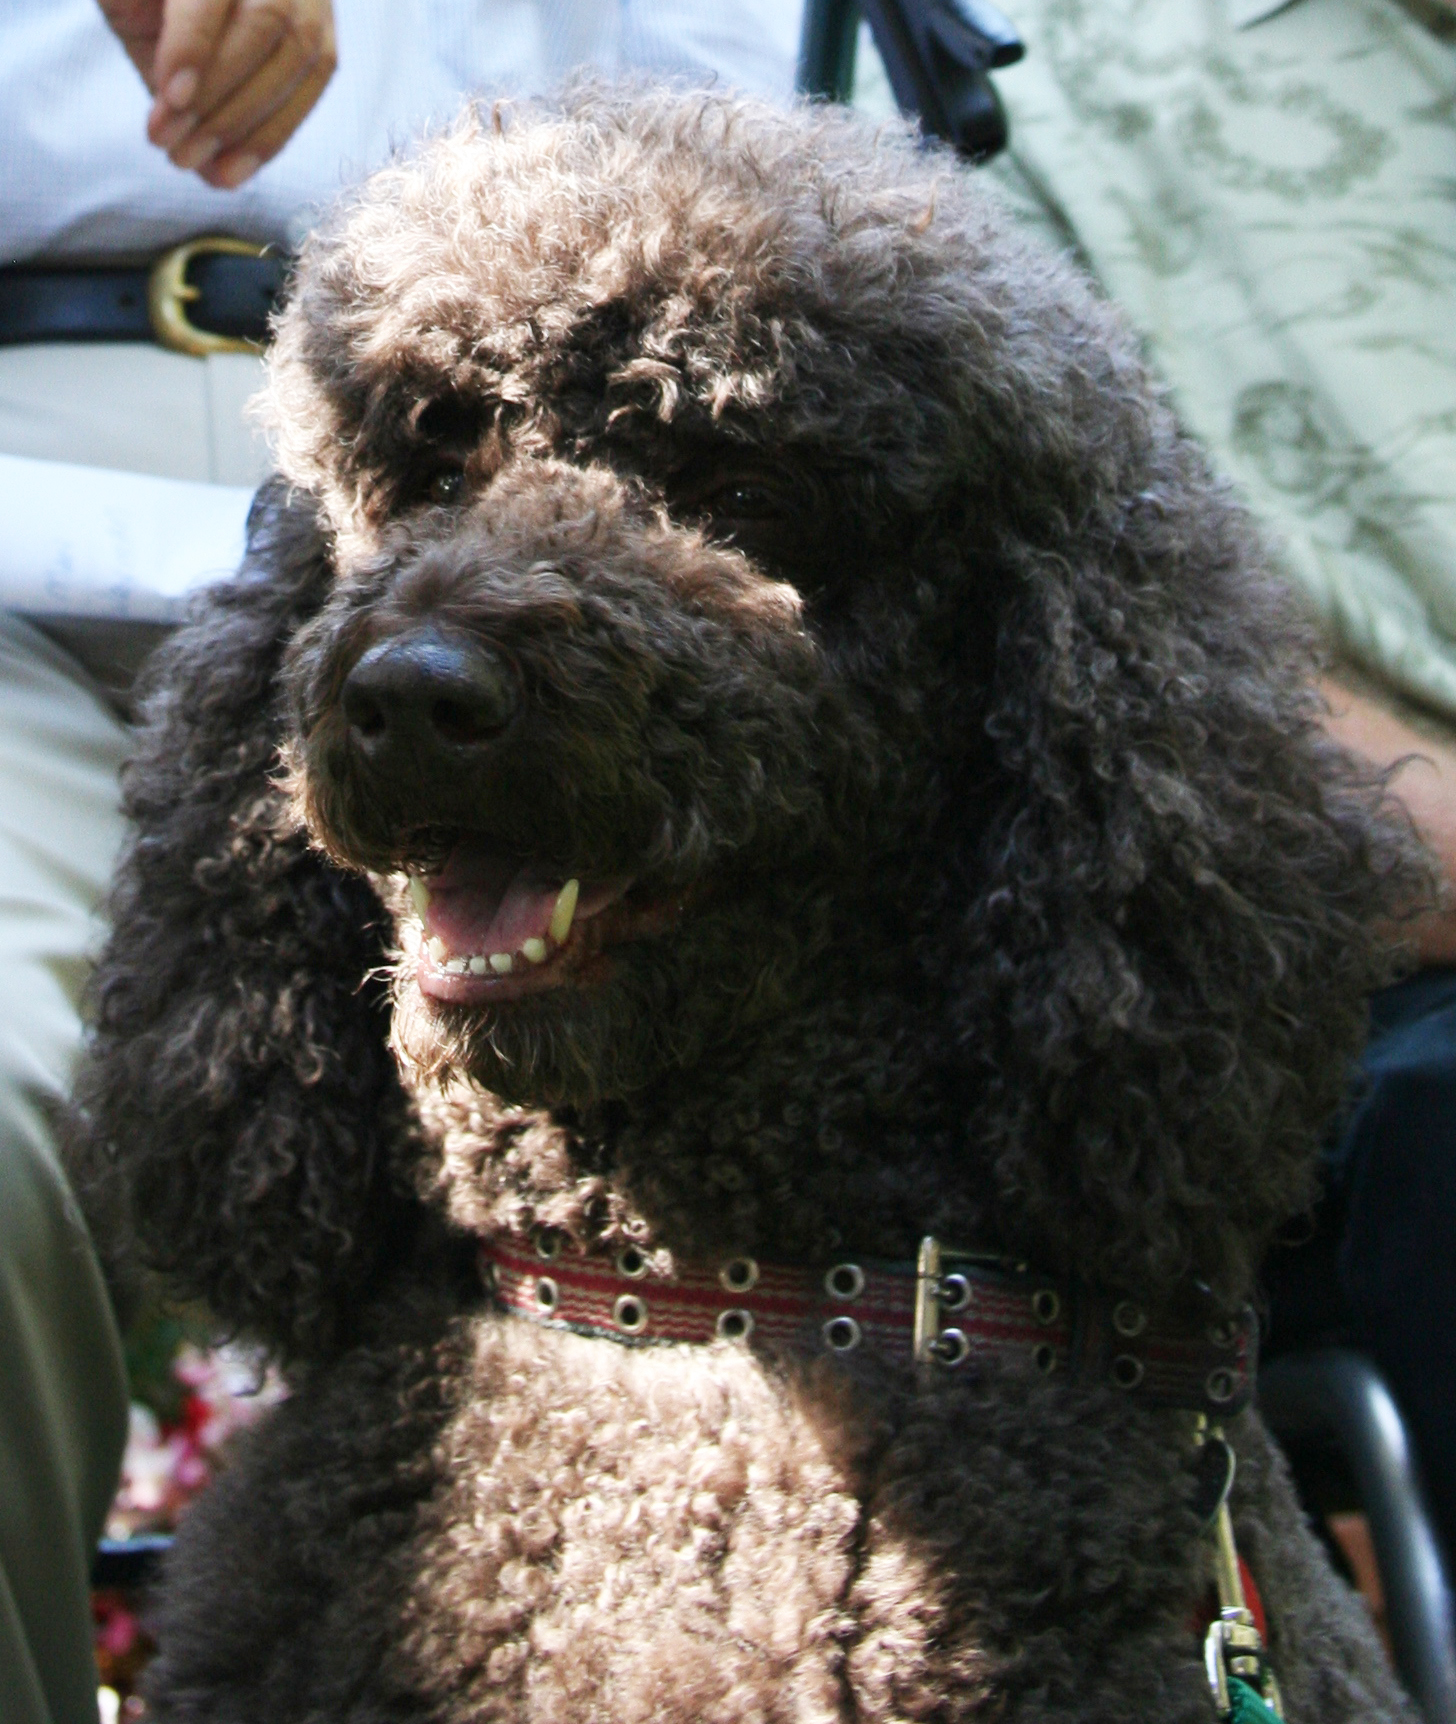 The Poodle Of Ryan Murphy's Obsession. Photo: ACLU